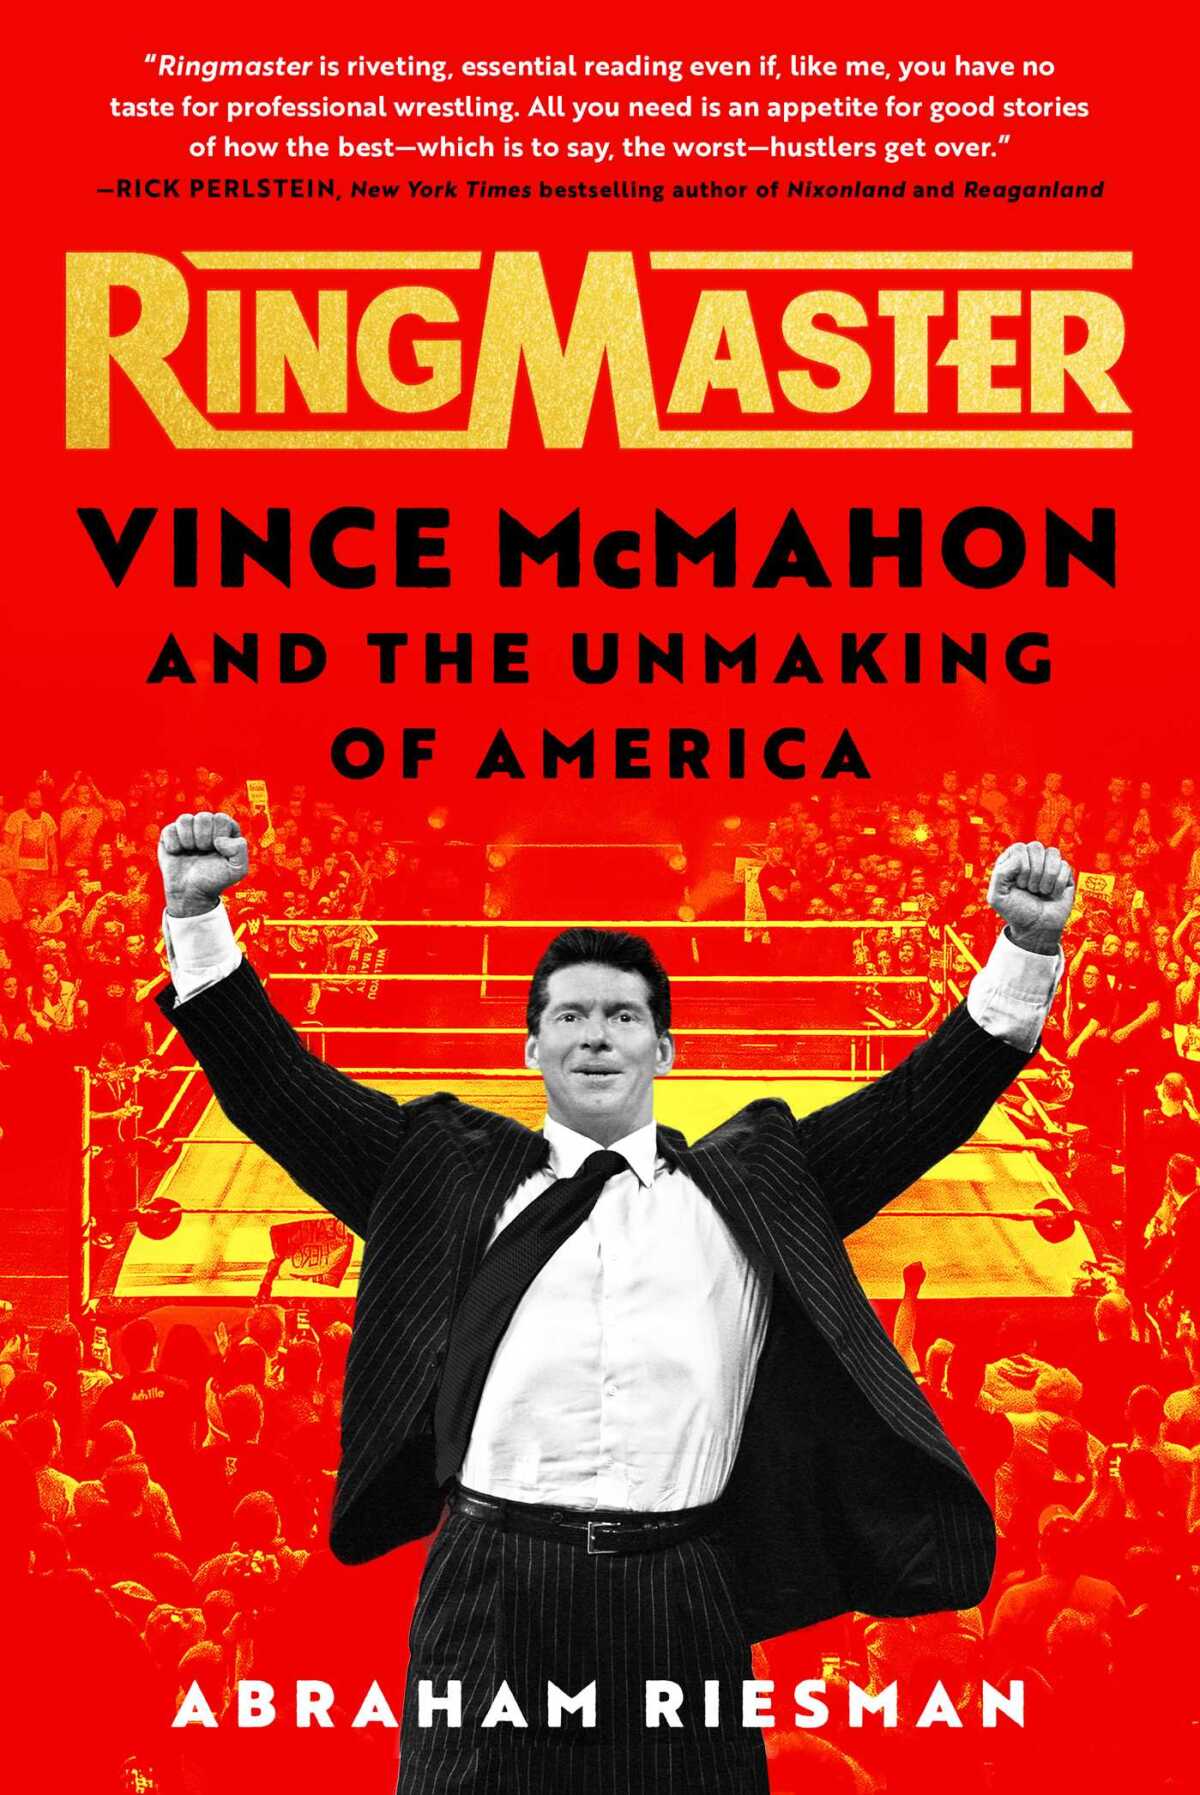 'Ringmaster: Vince McMahon and the Unmaking of America,' by Abraham Josephine Riesman